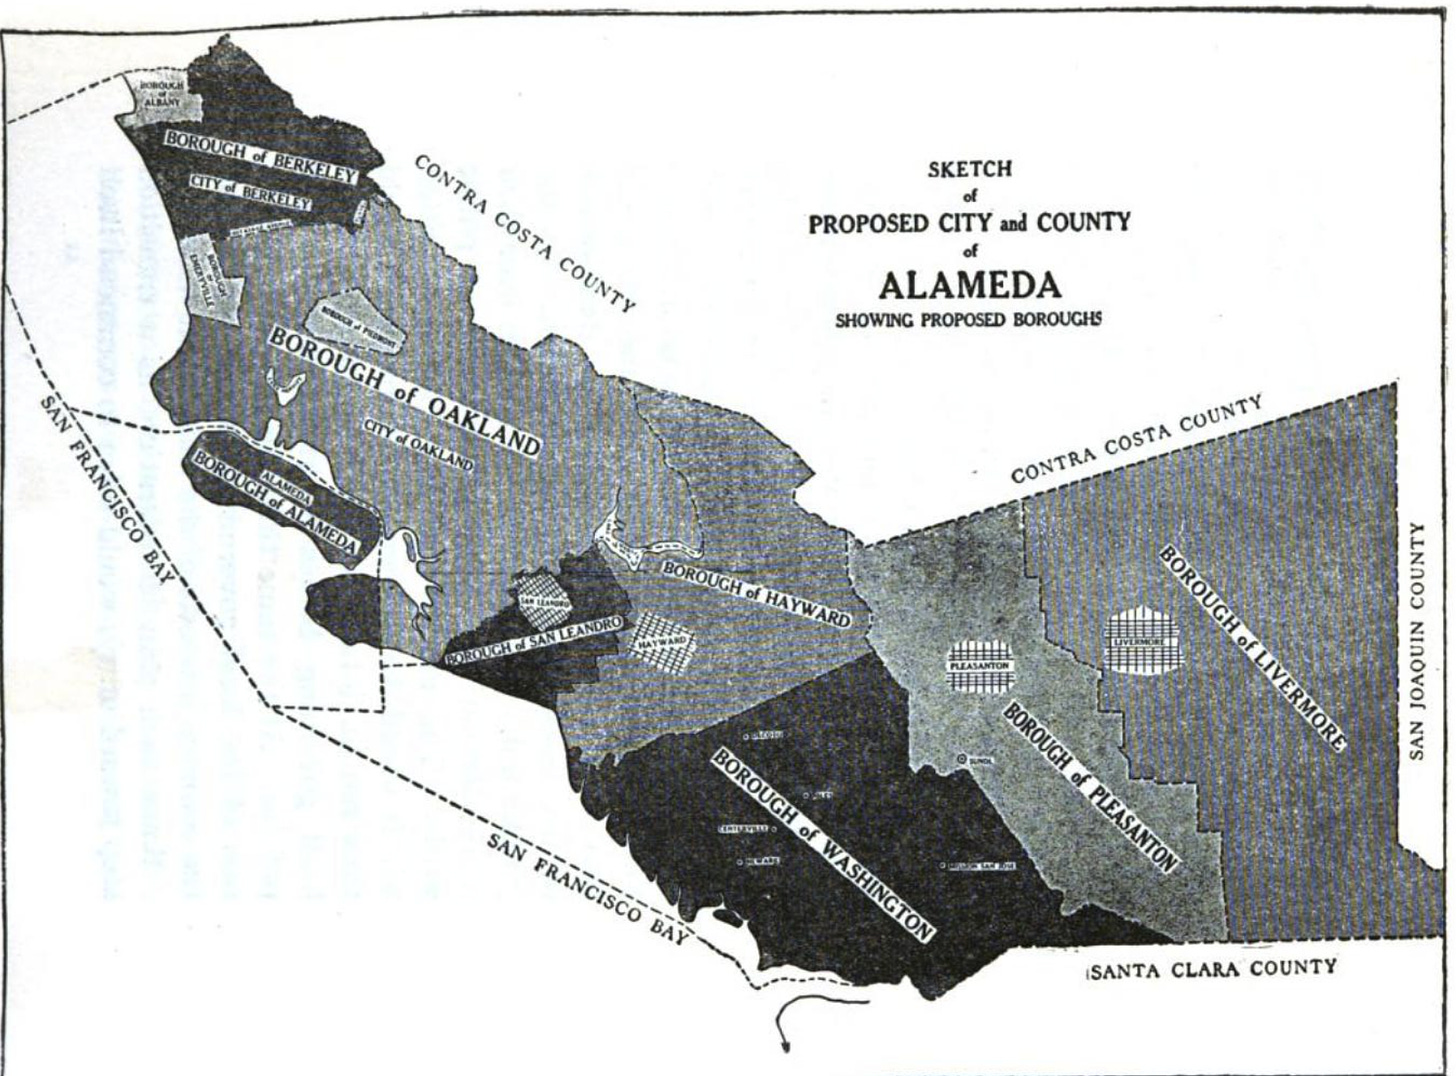 A map showing the proposed boroughs of the City and County of Alameda